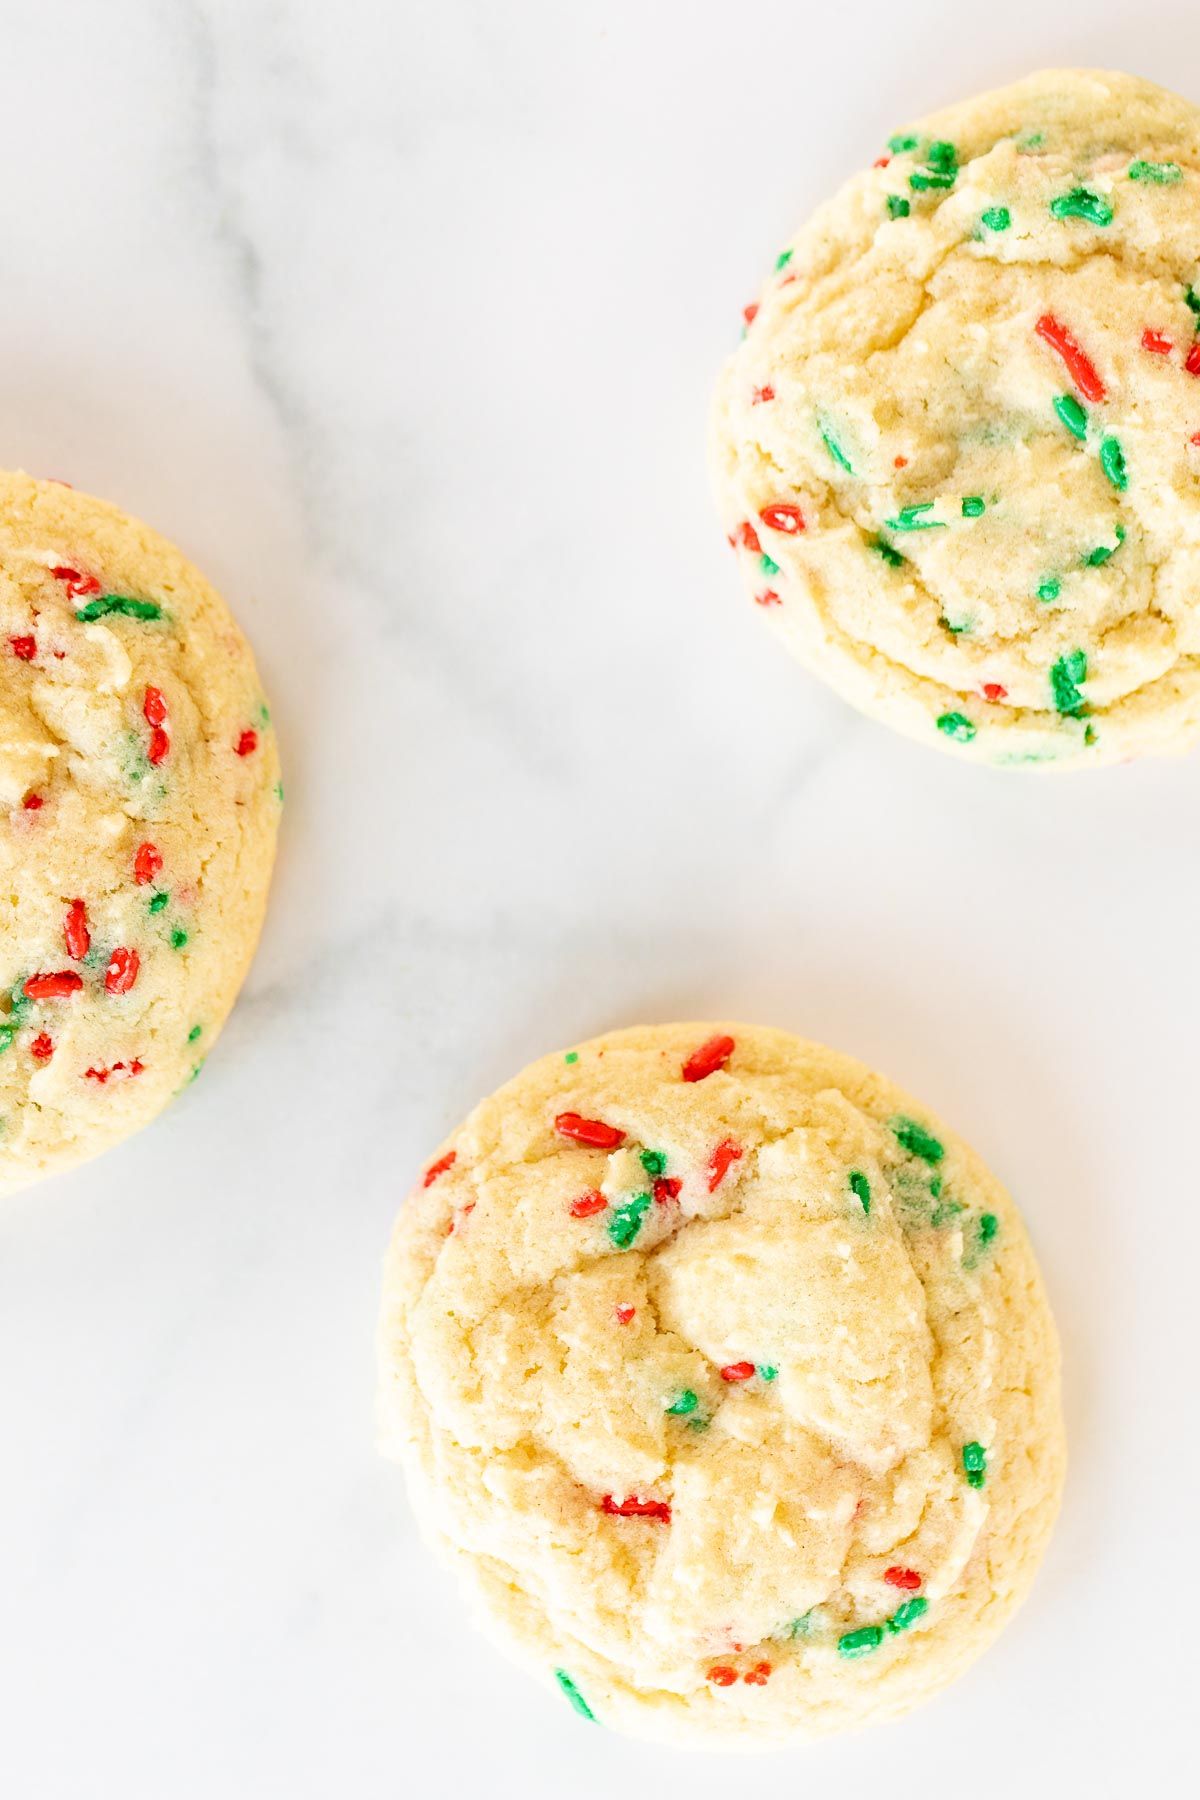 Homemade Christmas funfetti cookies on a white surface.